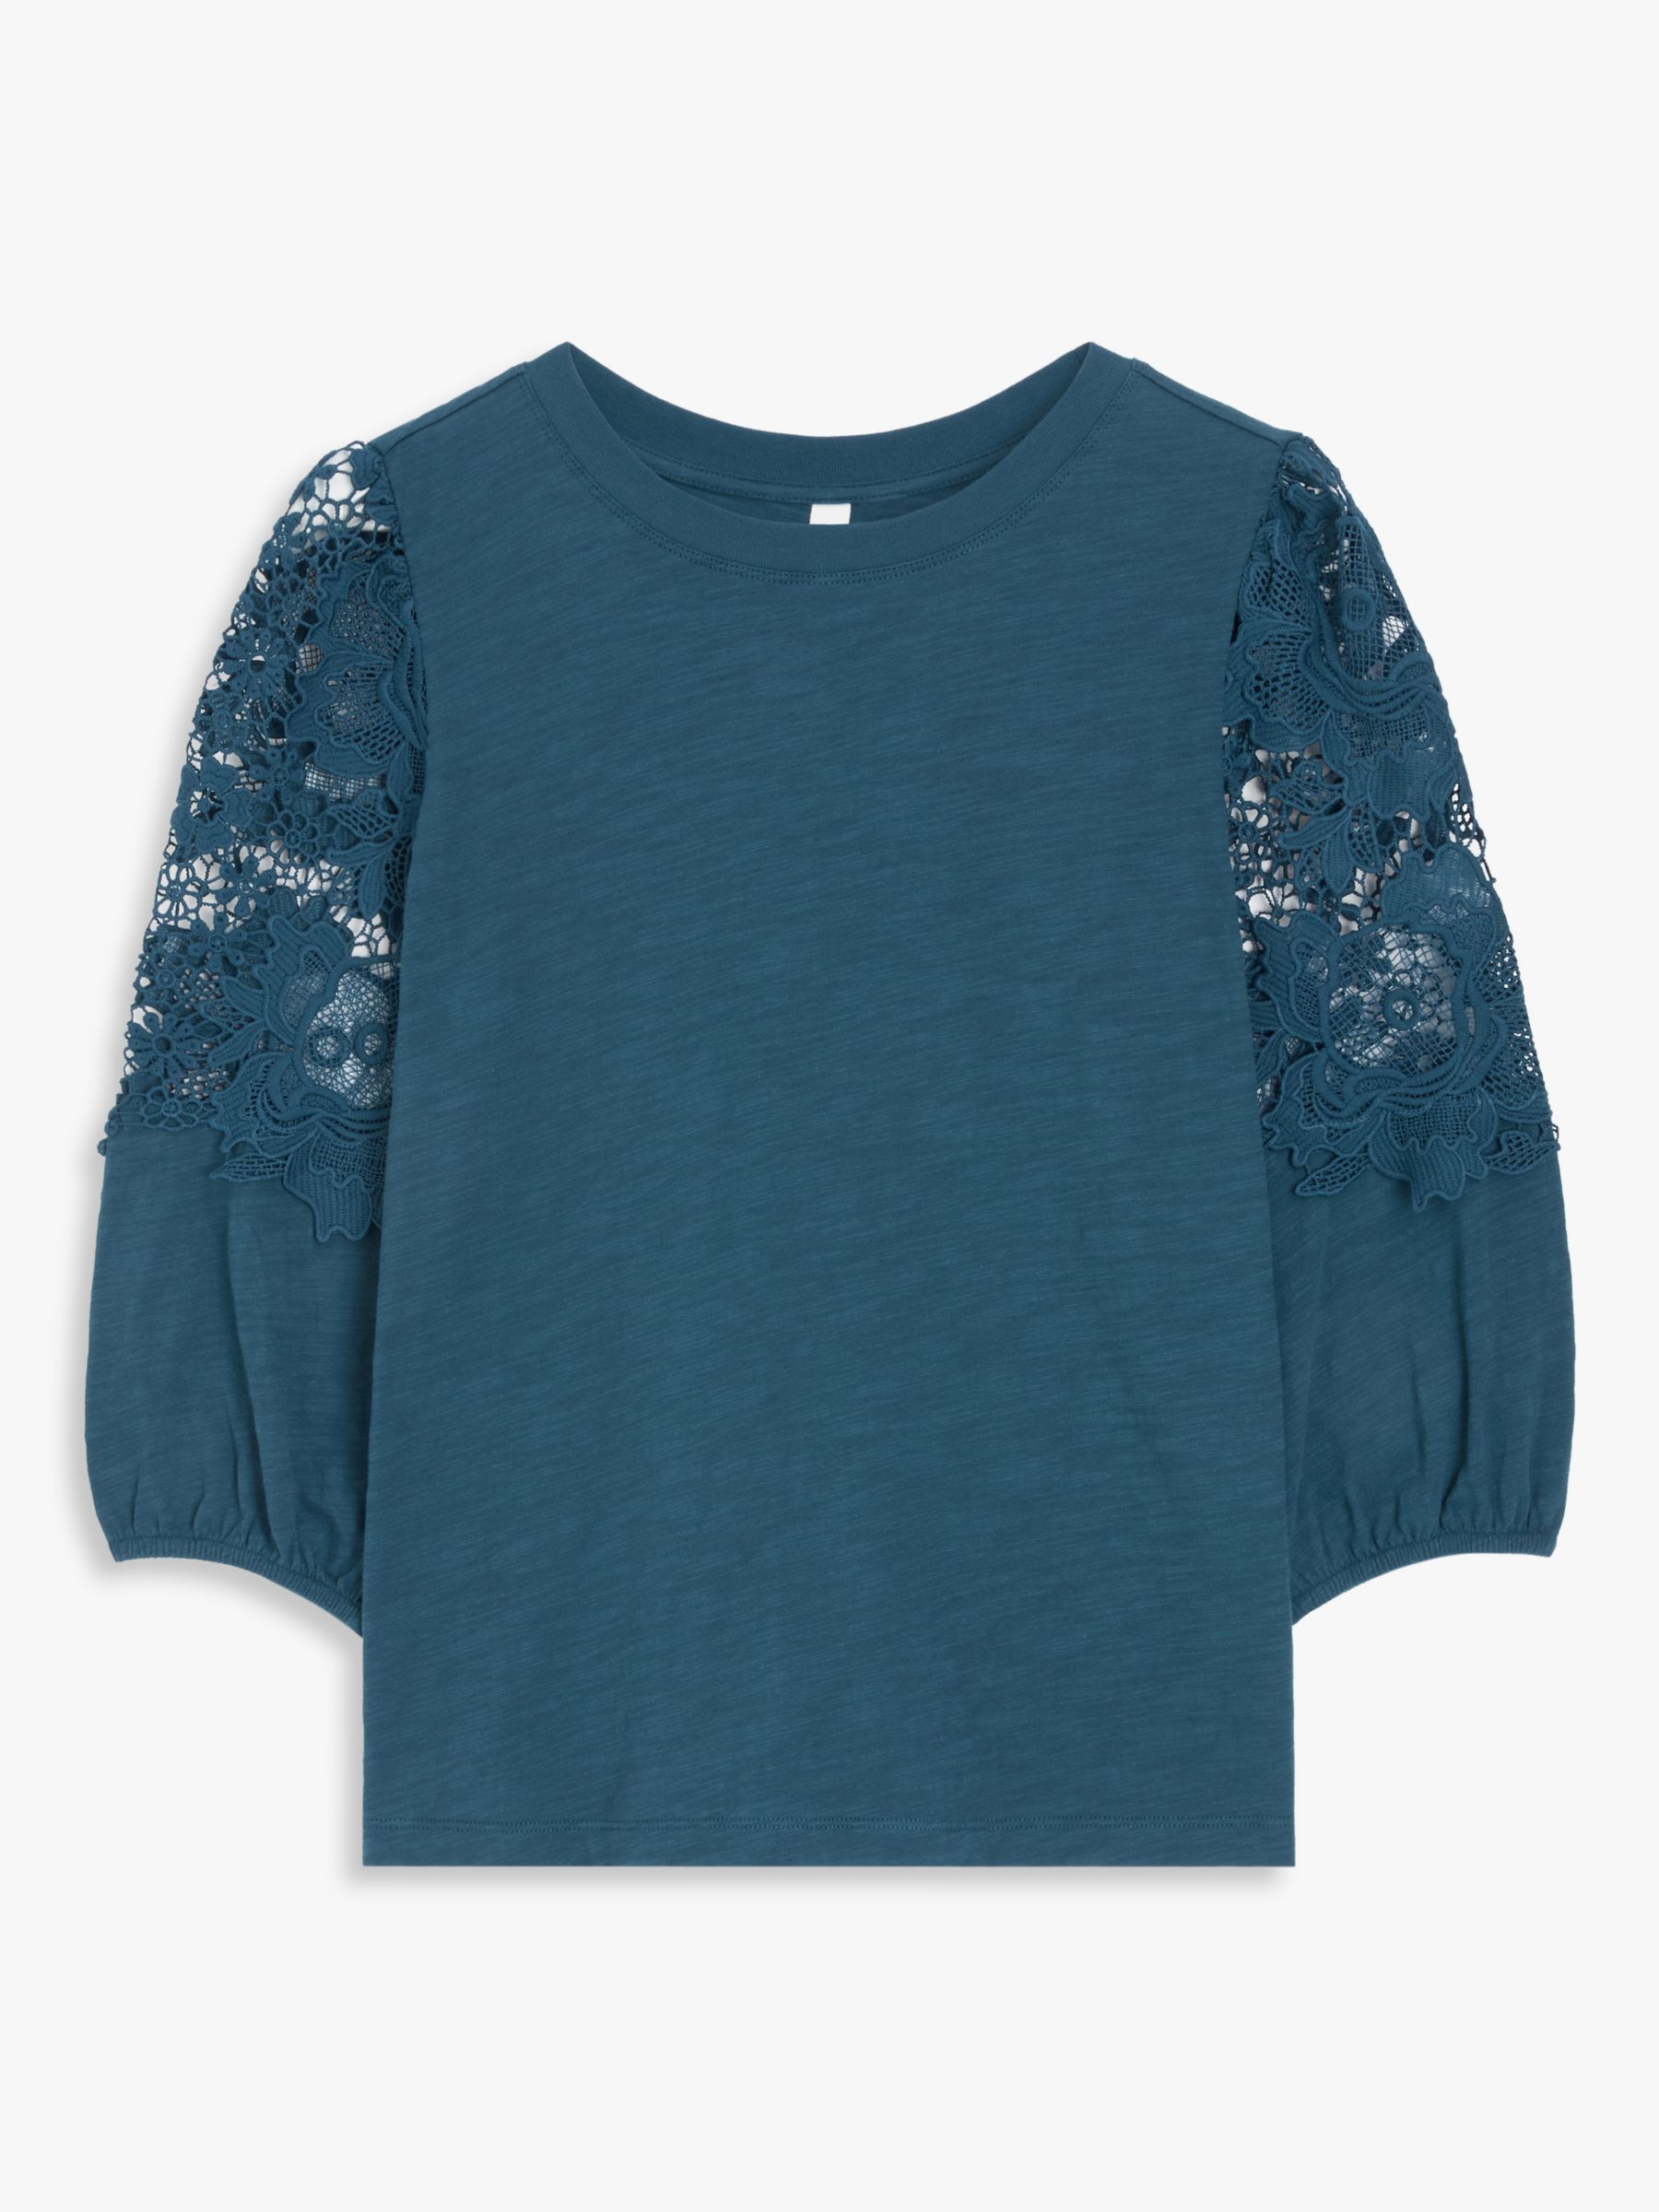 AND/OR Letty Lace Sleeve Top, Teal, 6